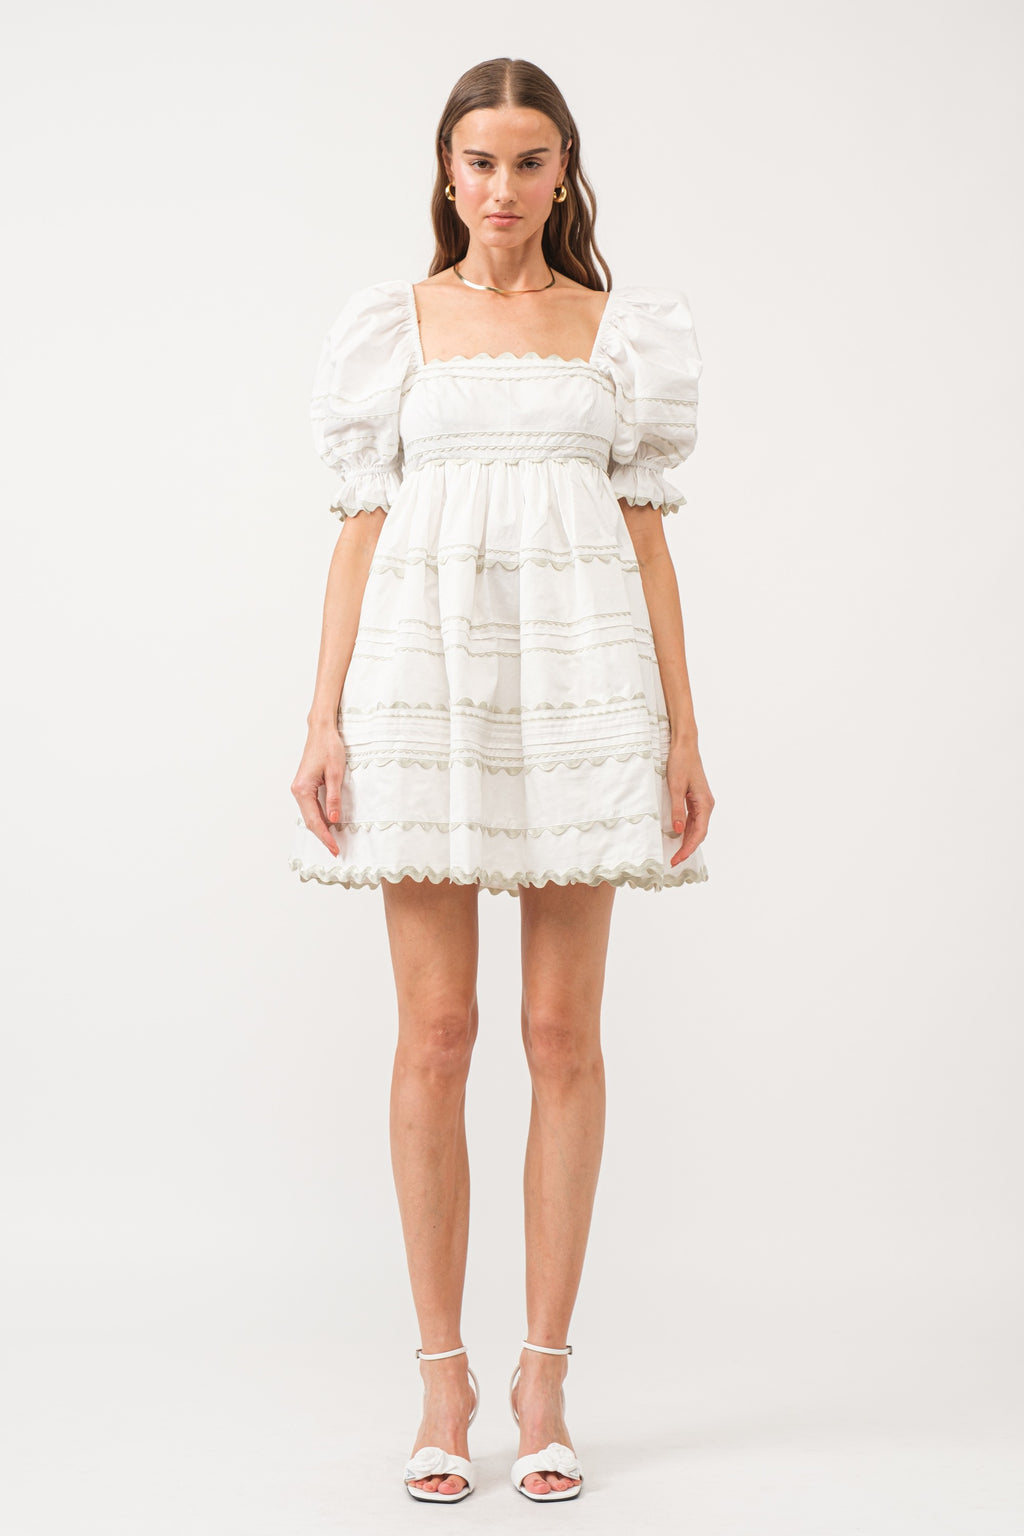 Sofie The Label Off White Puff Sleeve Babydoll Dress